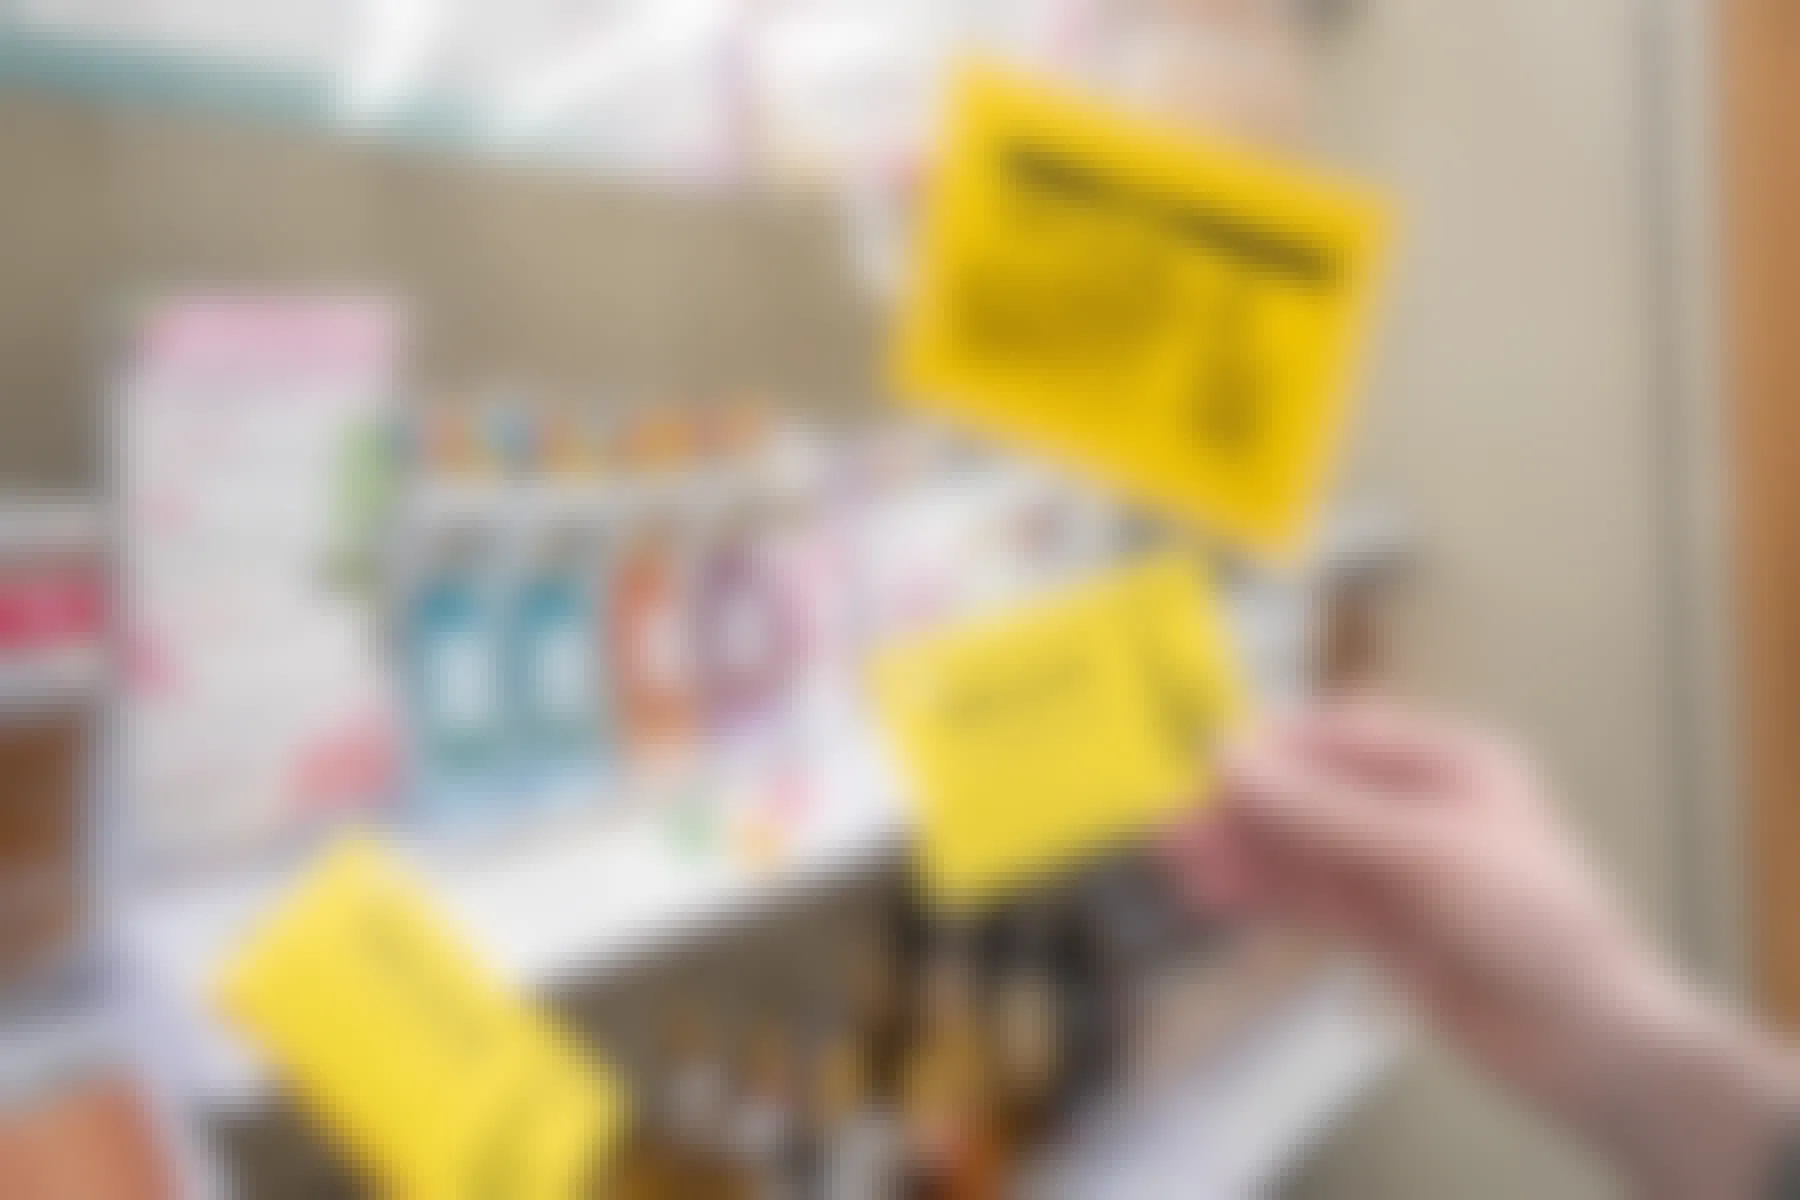 A person's hand holding up a coupon for $3 off next to a shelf with fragrances and more coupons hanging from a hook.